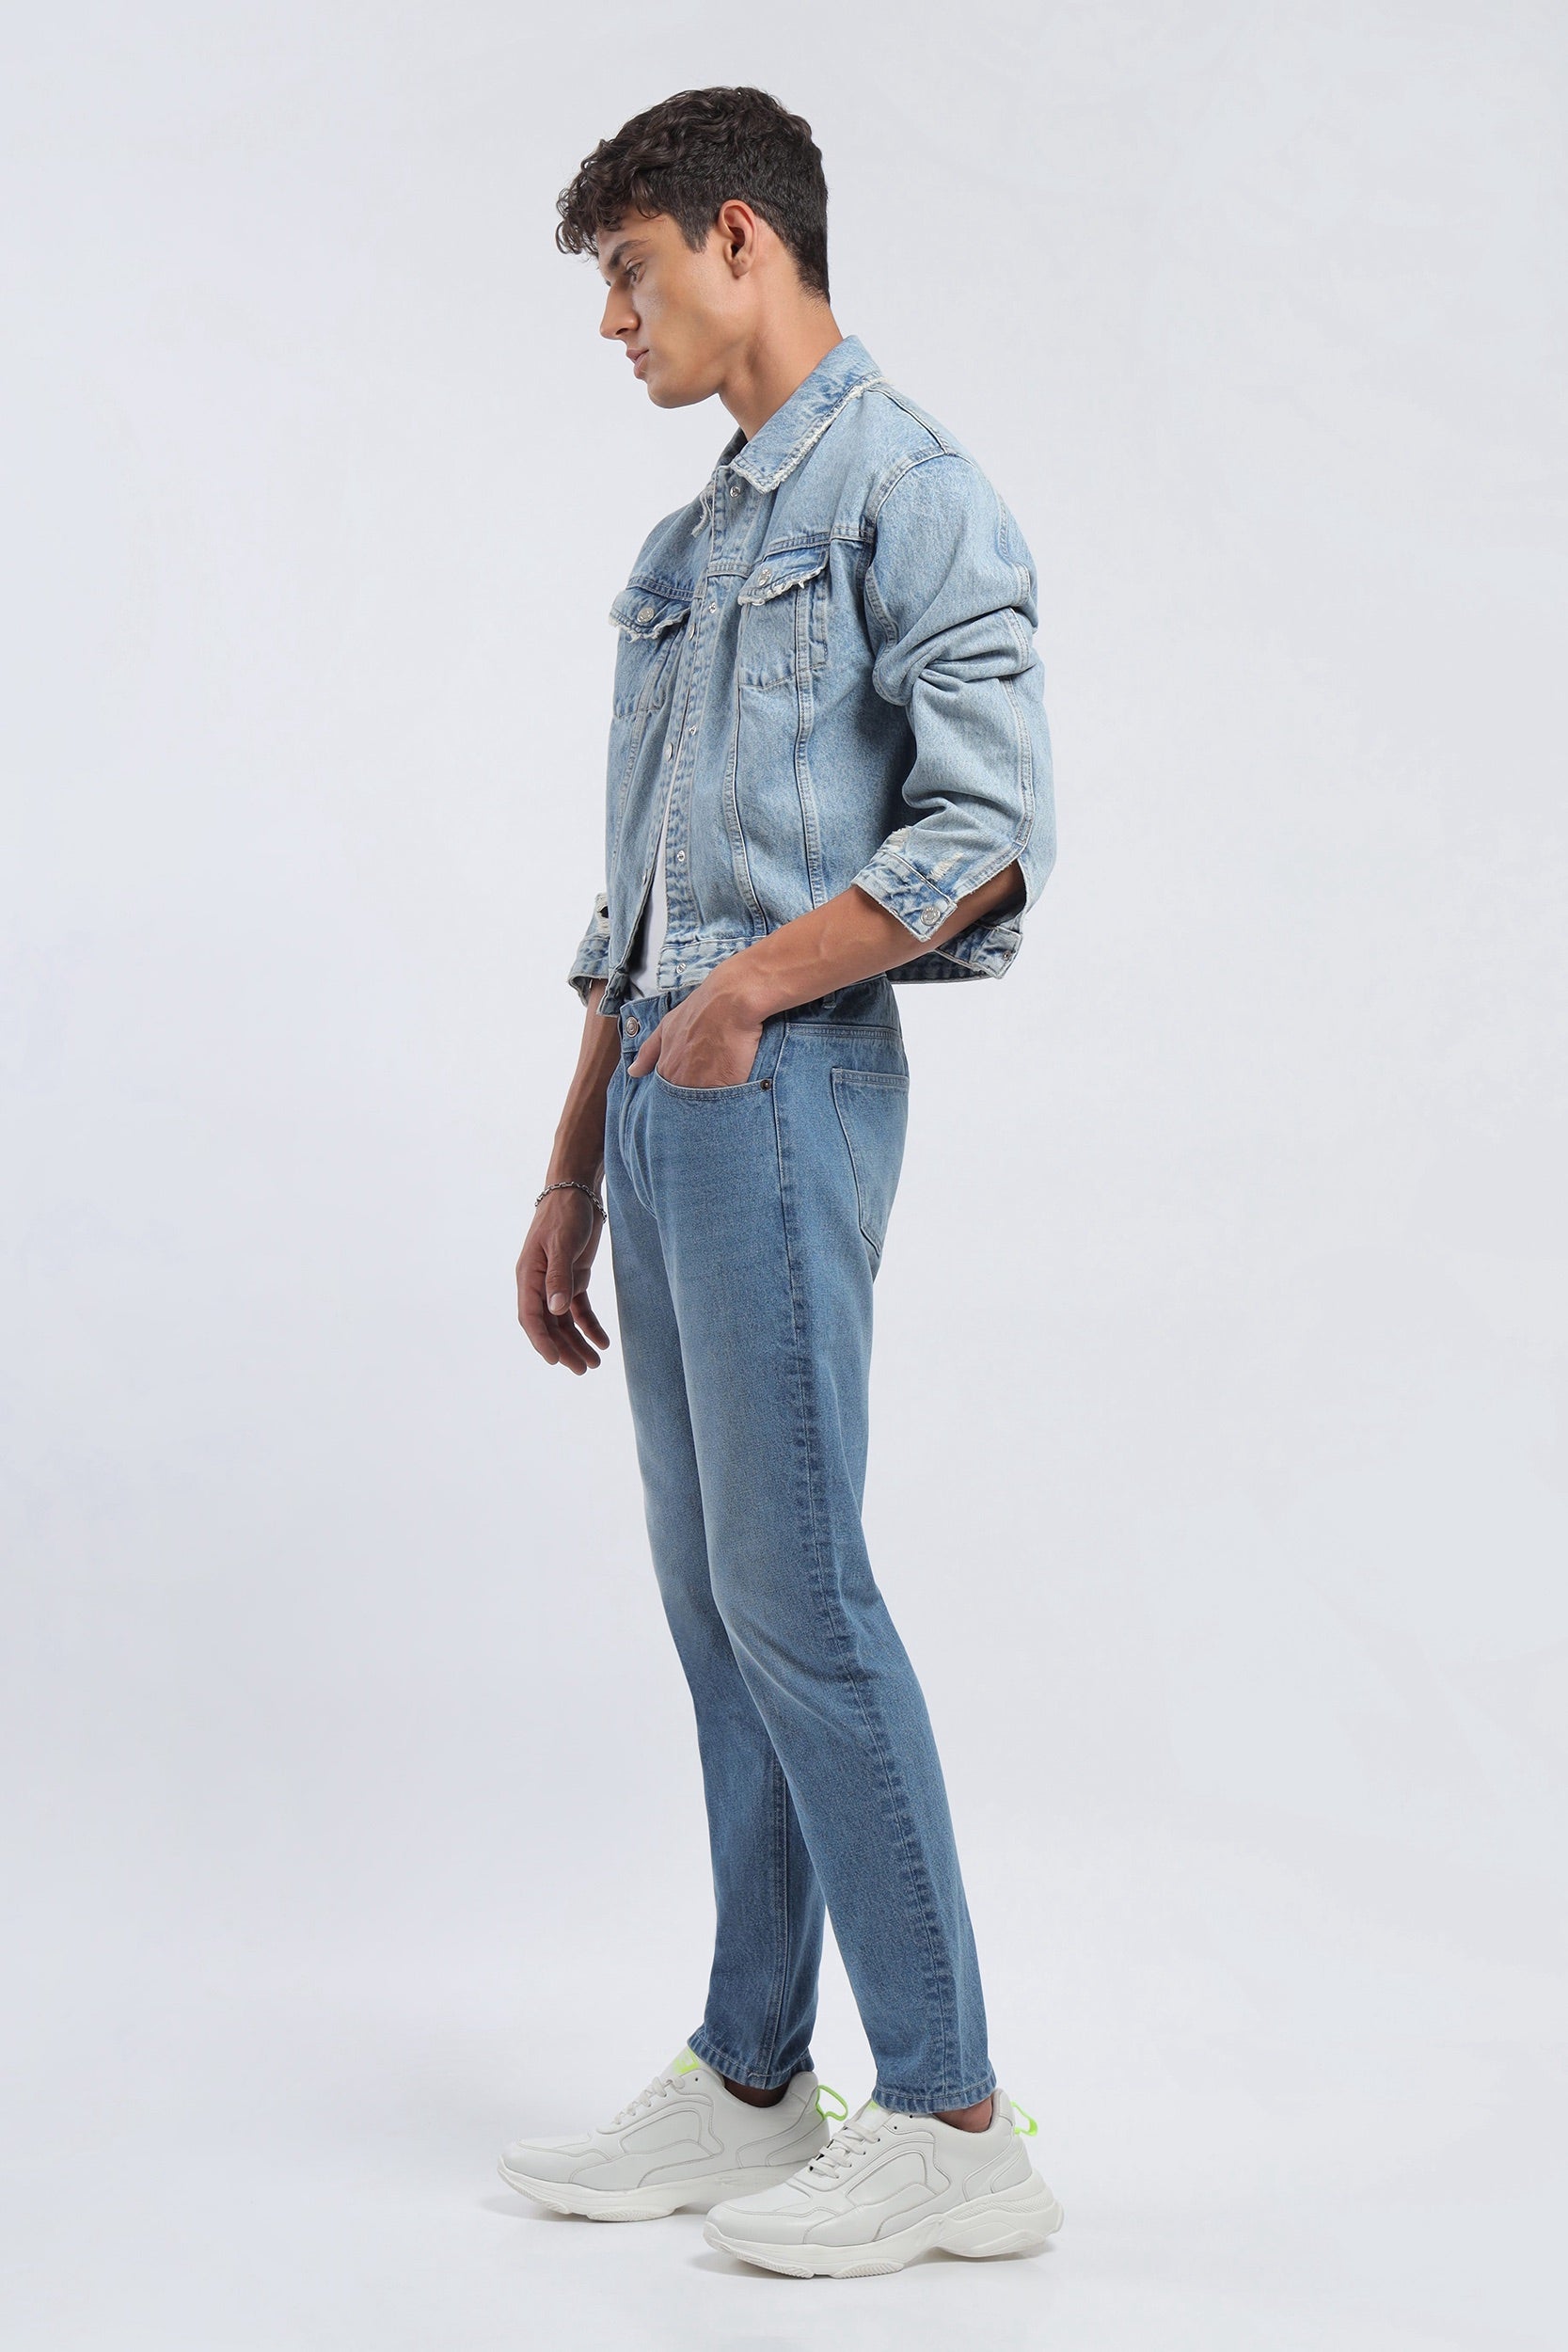 New Fashion Jegging Cropped Length Stretch Light Blue Denim Pants Jeans Men  - China Denim Jeans and Denim Jeans Men price | Made-in-China.com